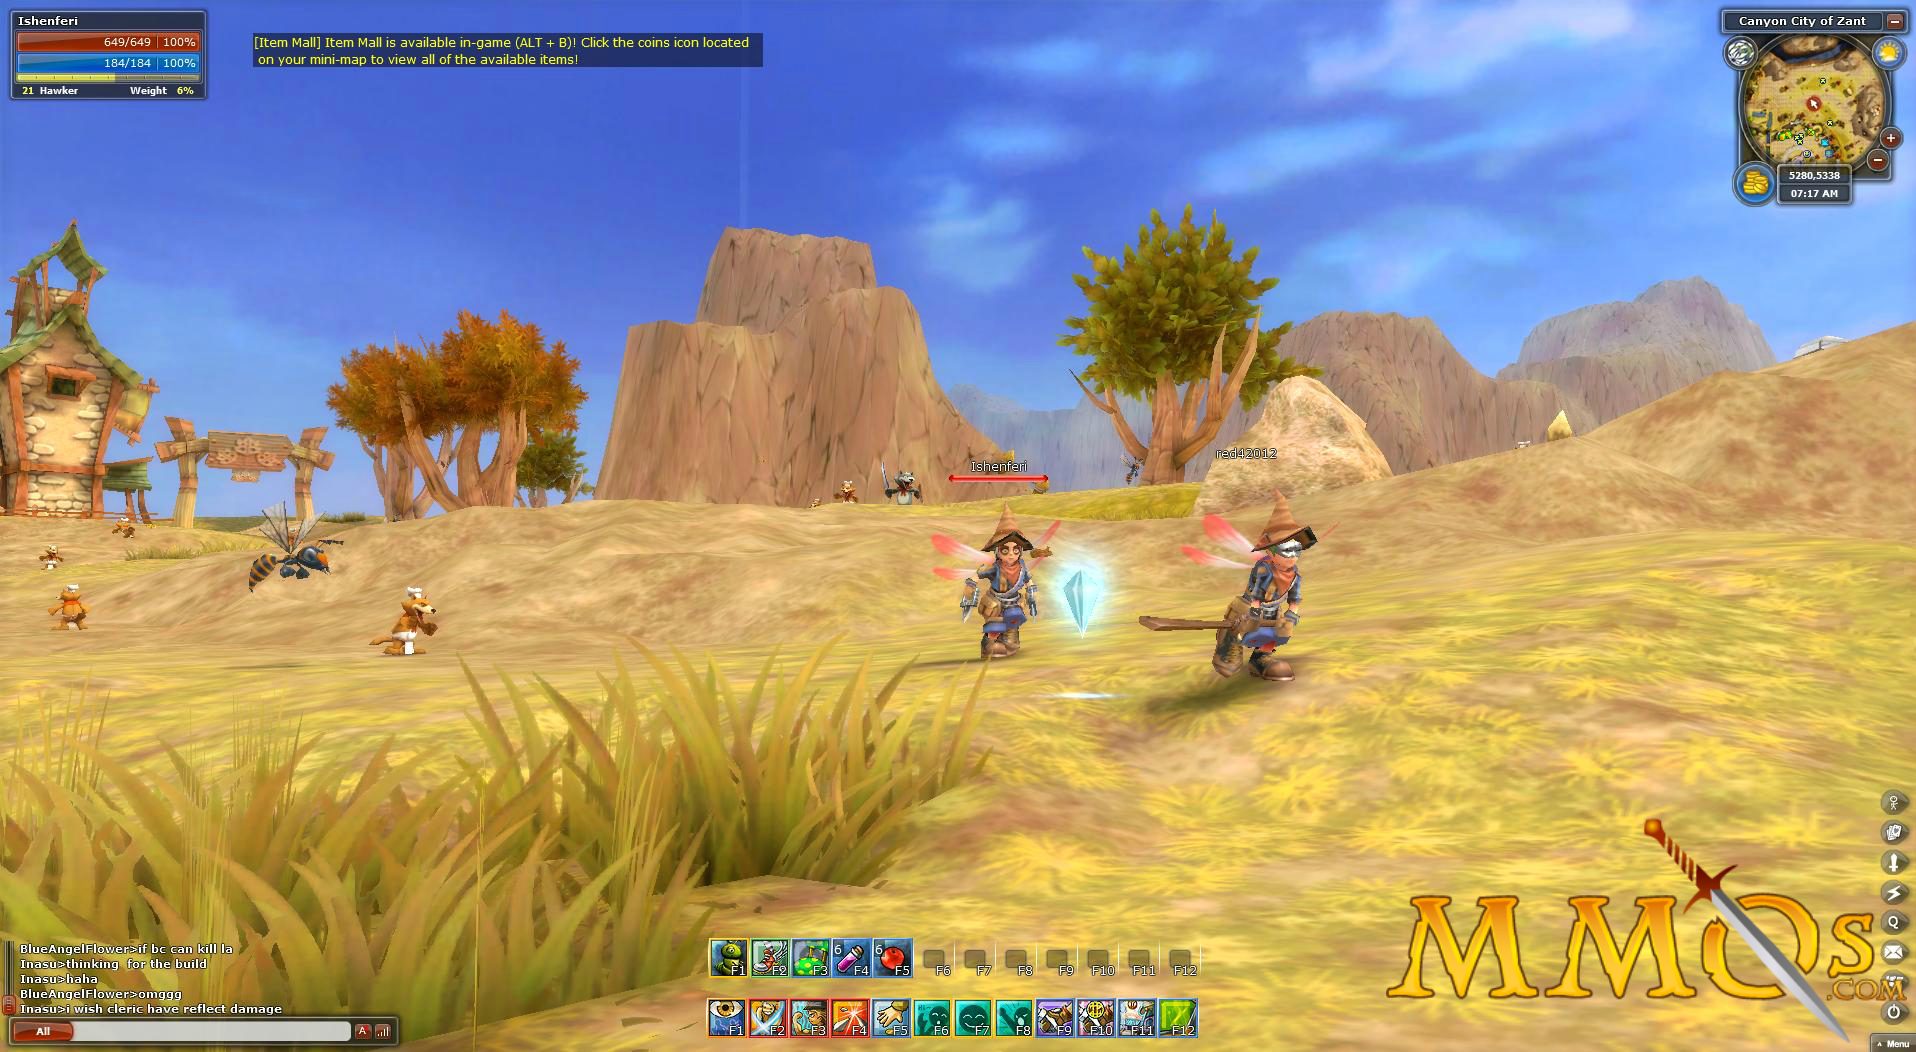 ROSE Online Mobile - Mobile MMORPG based on classic IP announced for Japan  - MMO Culture